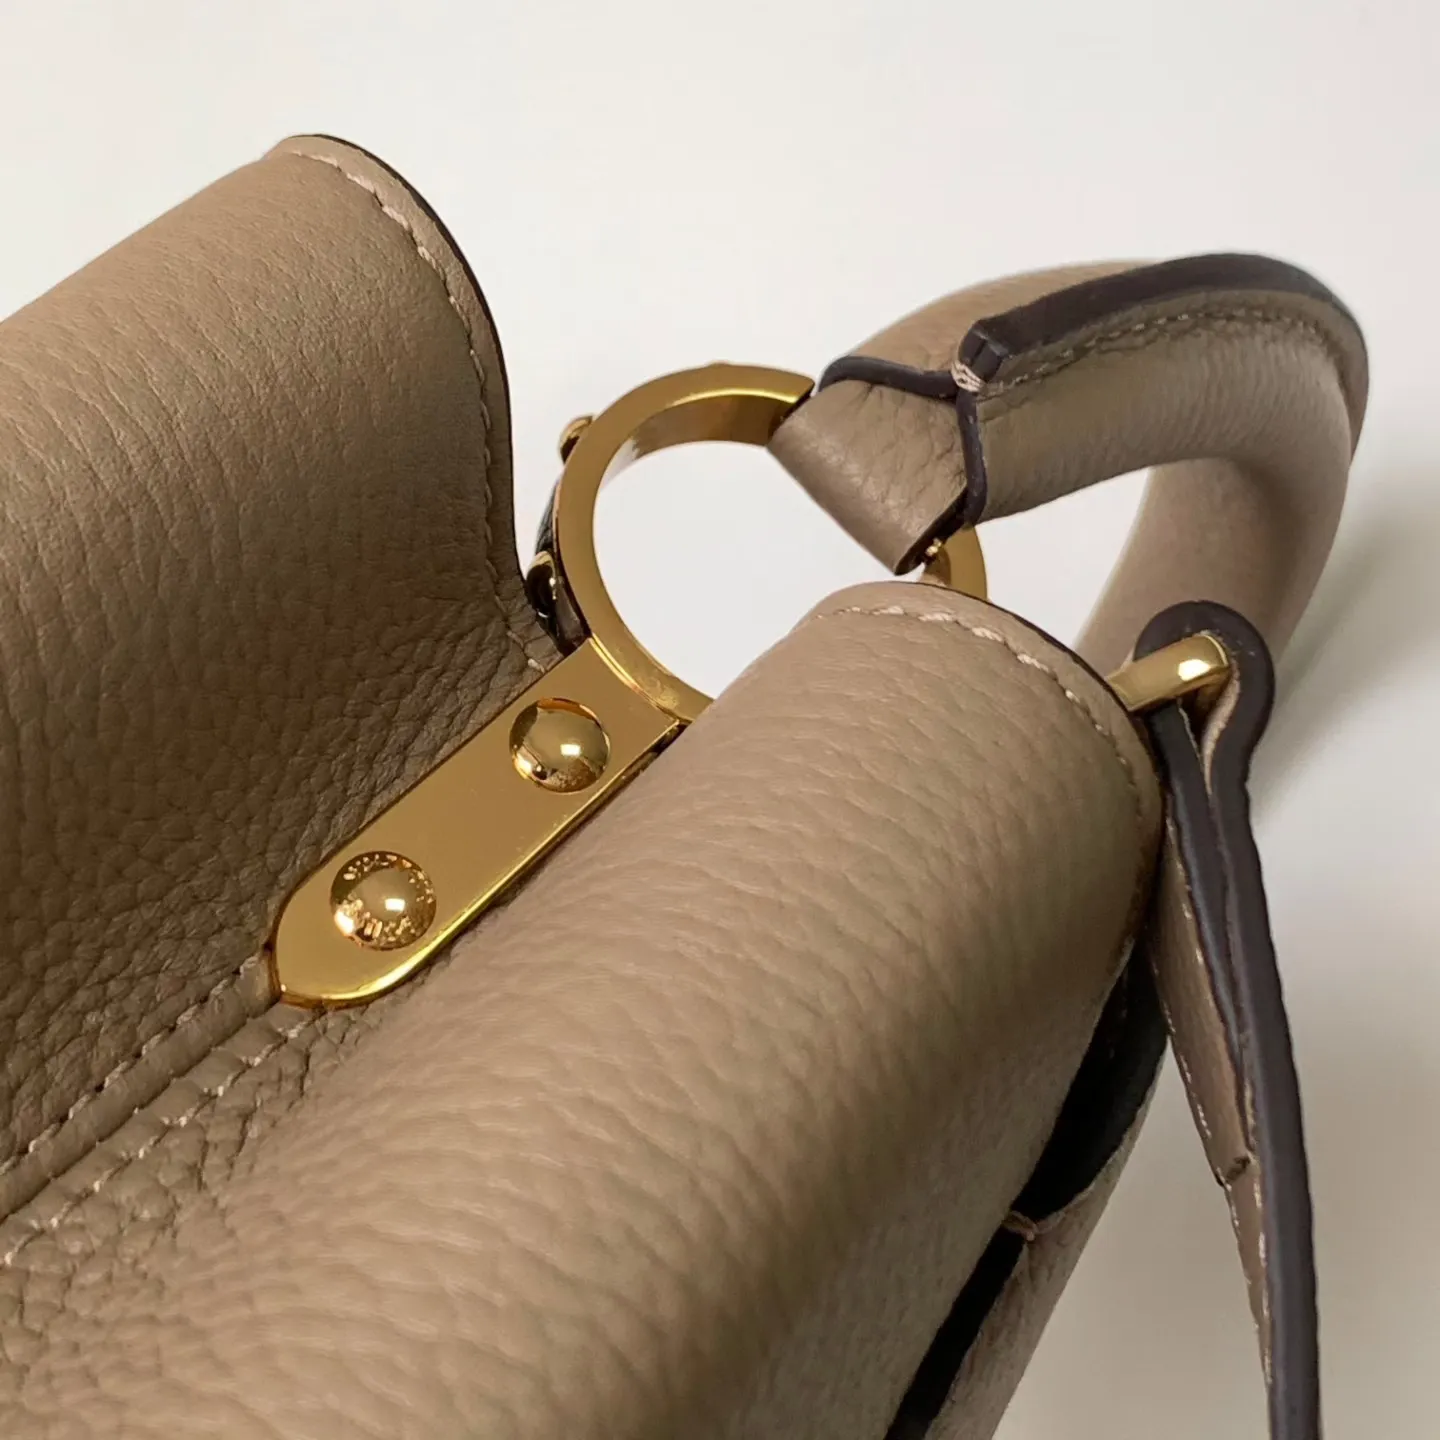 Styling the LV Easy Pouch On Strap, Gallery posted by Kyla Tan